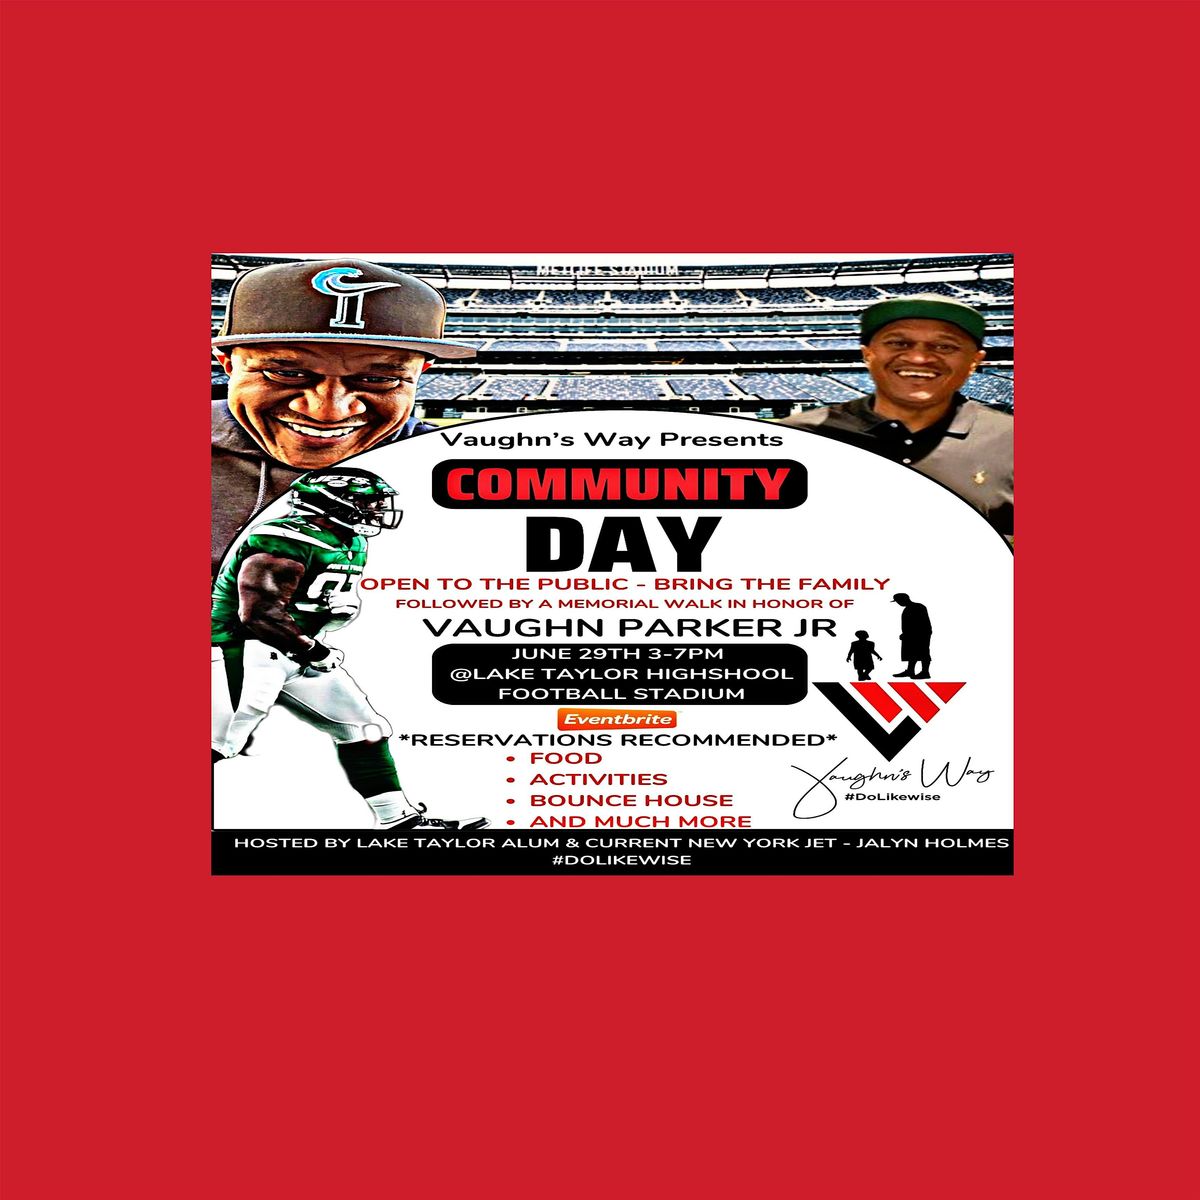 Vaughn's Way Community day and Memorial Walk hosted by Jalyn Holmes